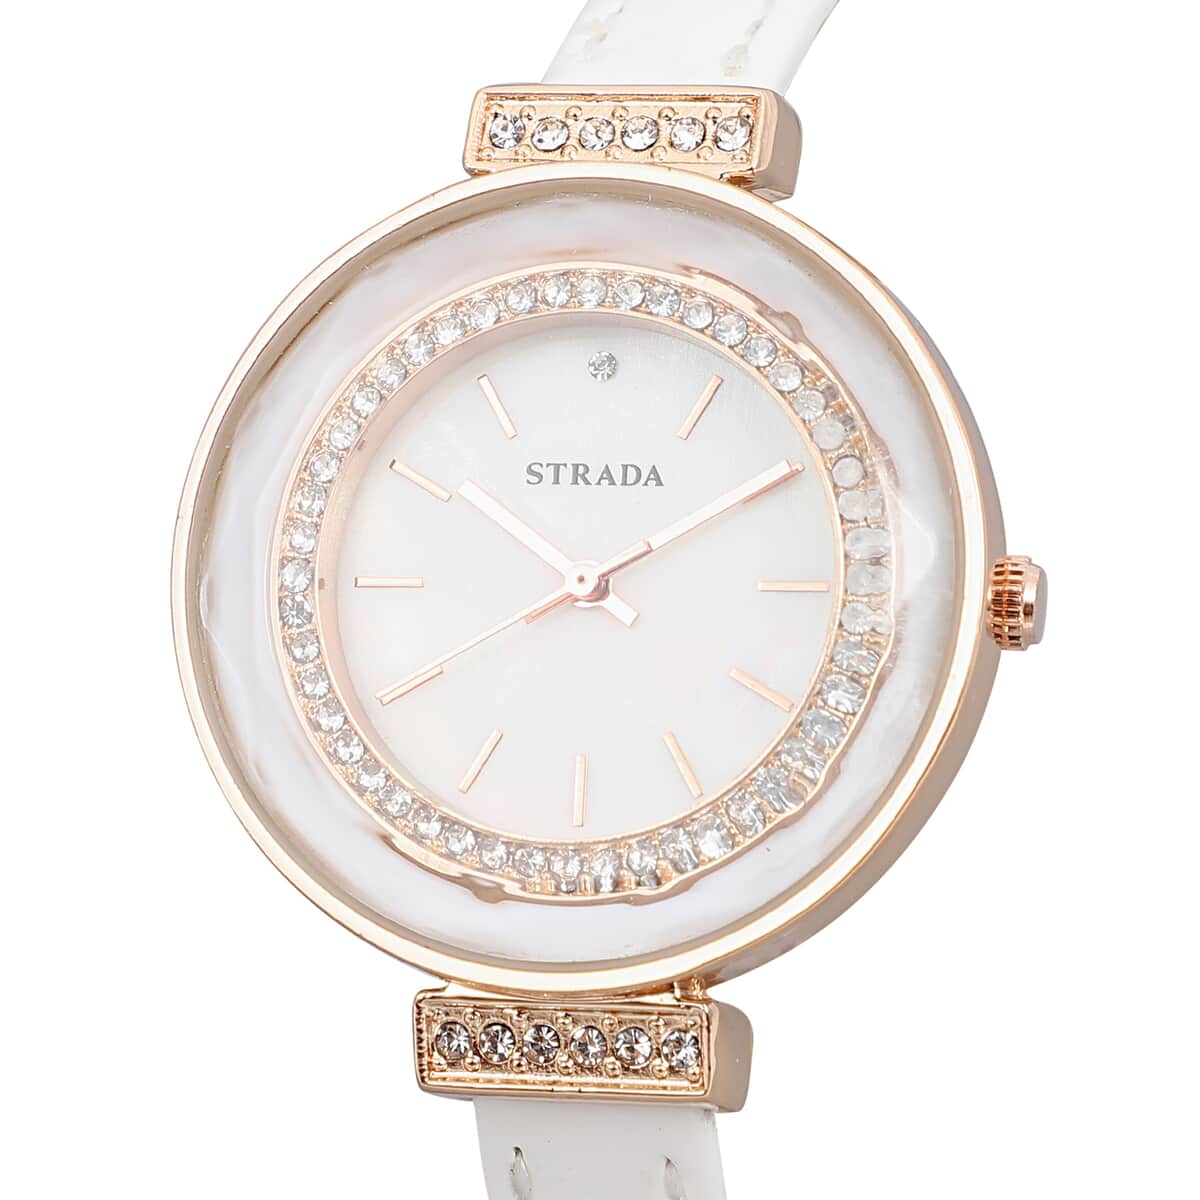 STRADA 10th ANNIVERSARY SPECIAL Austrian Crystal, Enameled Japanese Movement Watch with White Faux Leather Band image number 3